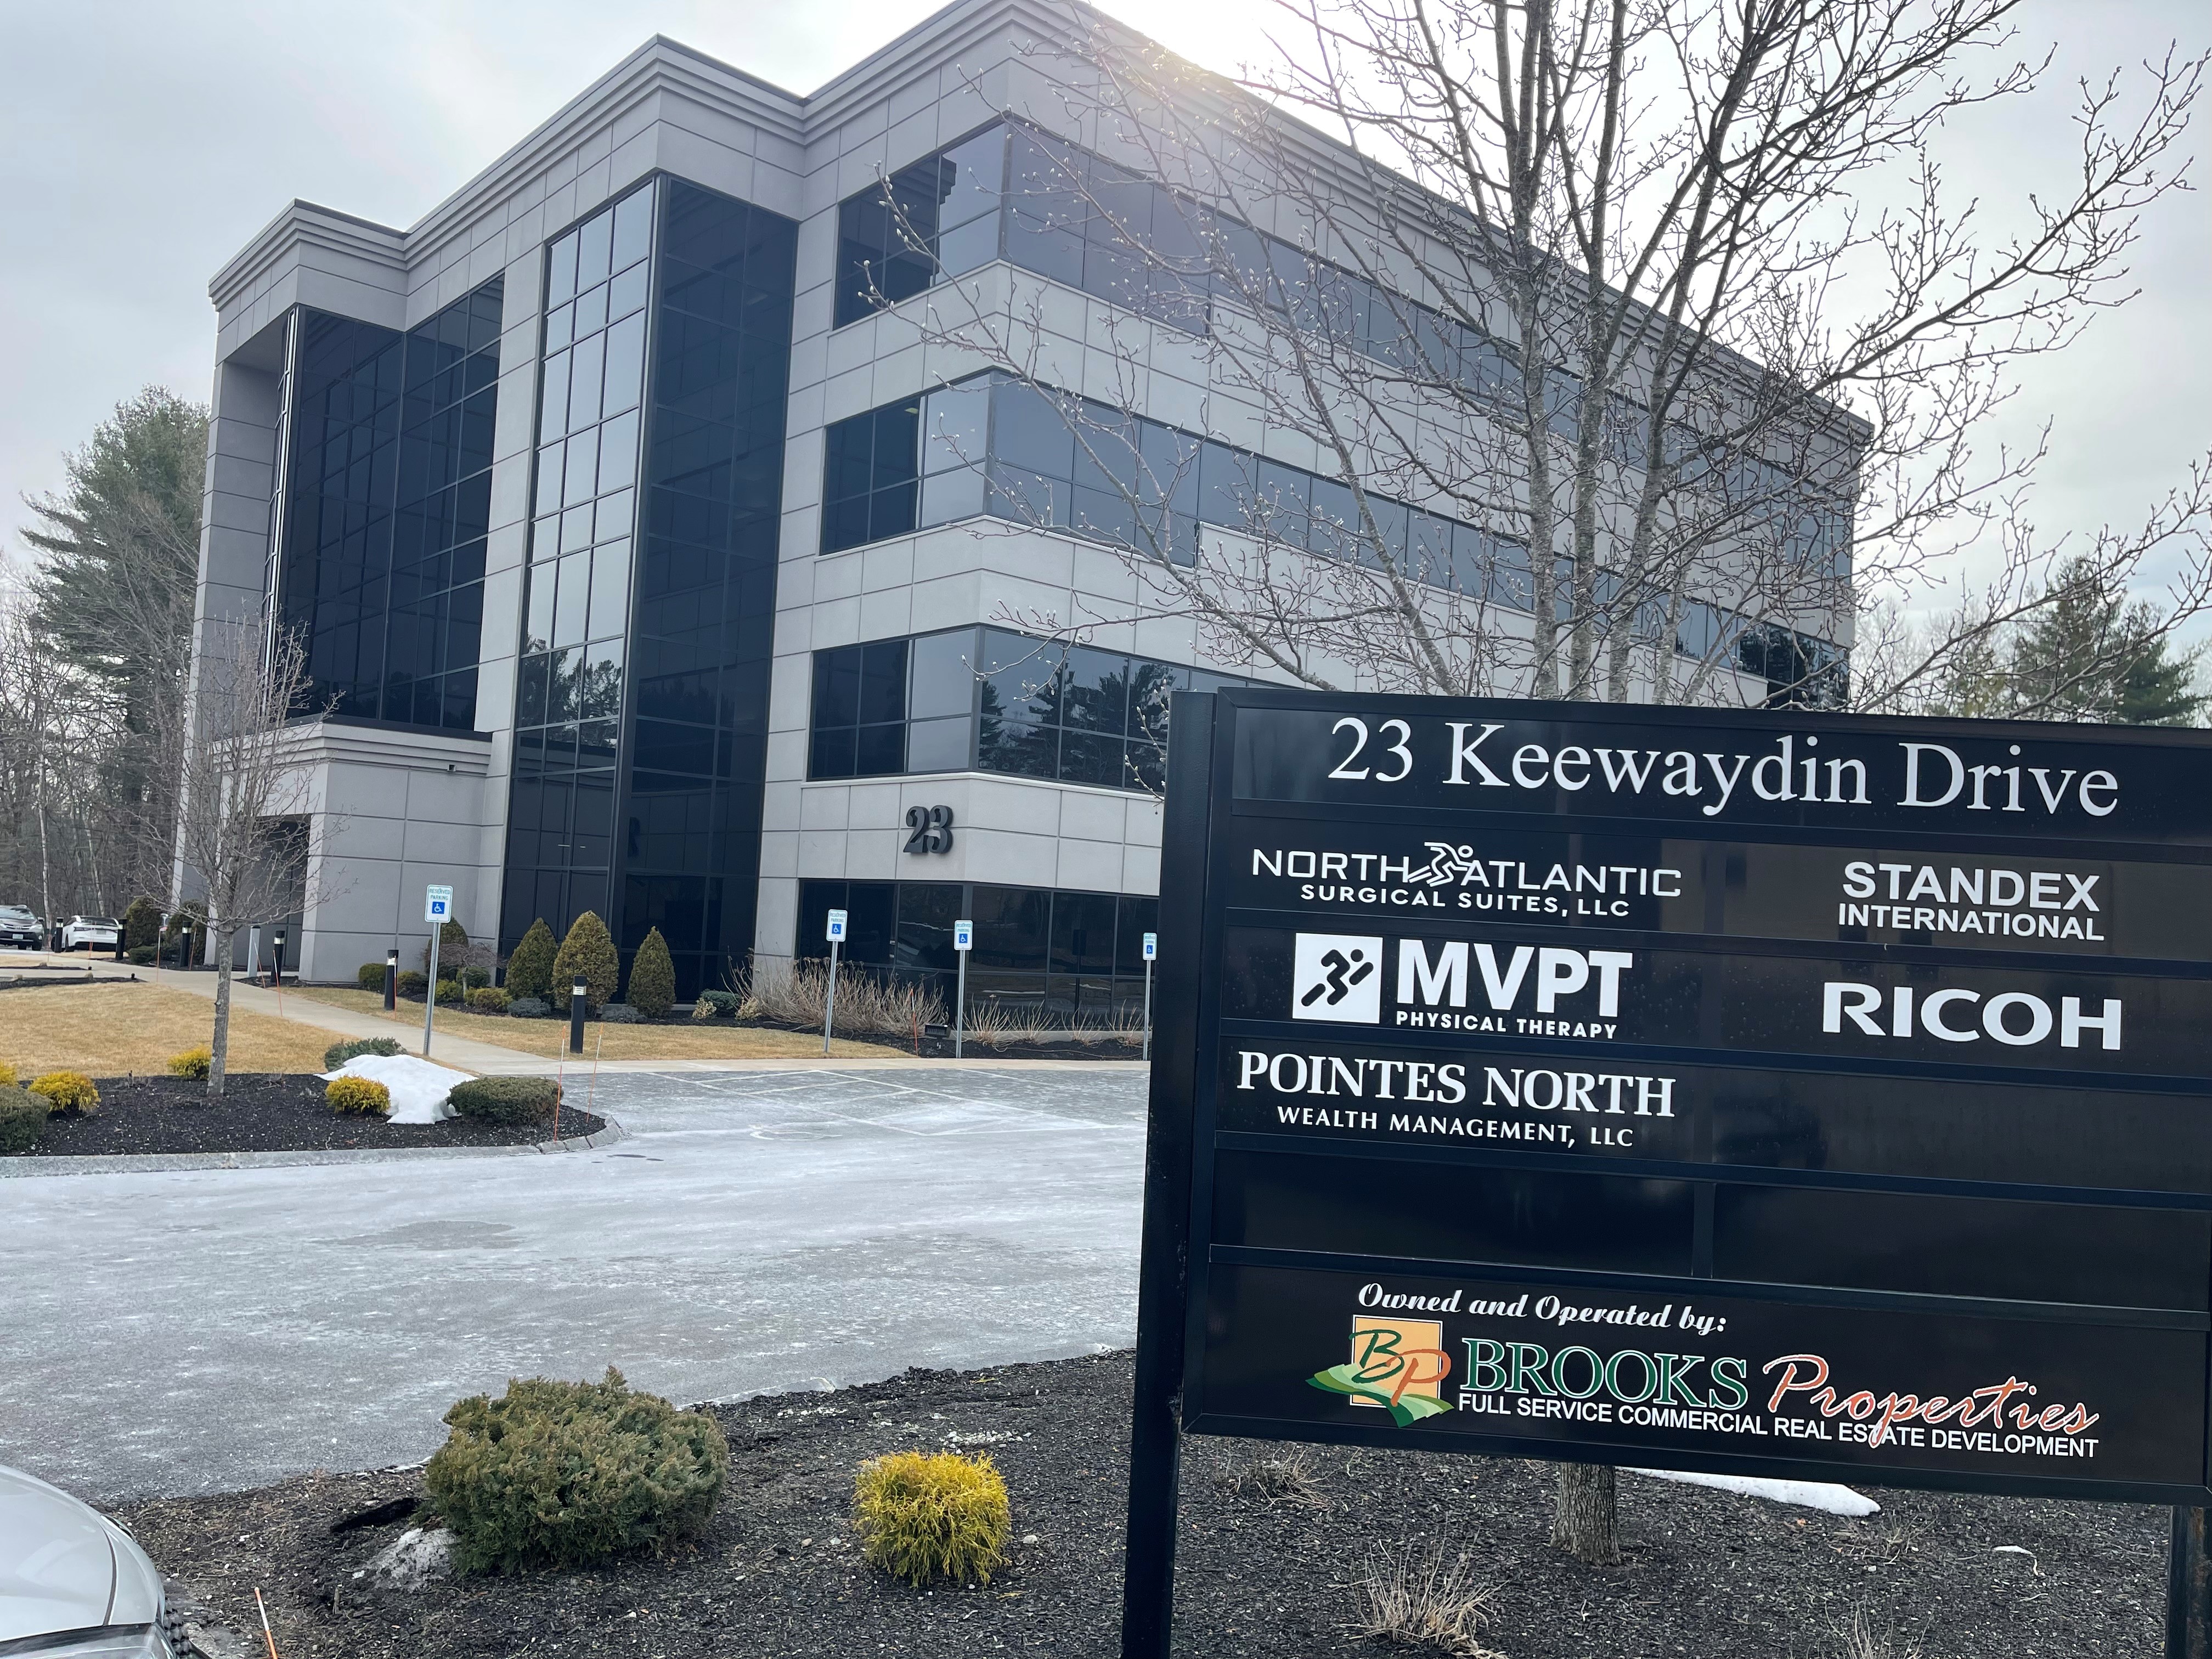 Our MVPT Salem office can be found at 23 Keewaydin Drive, Suite 101.